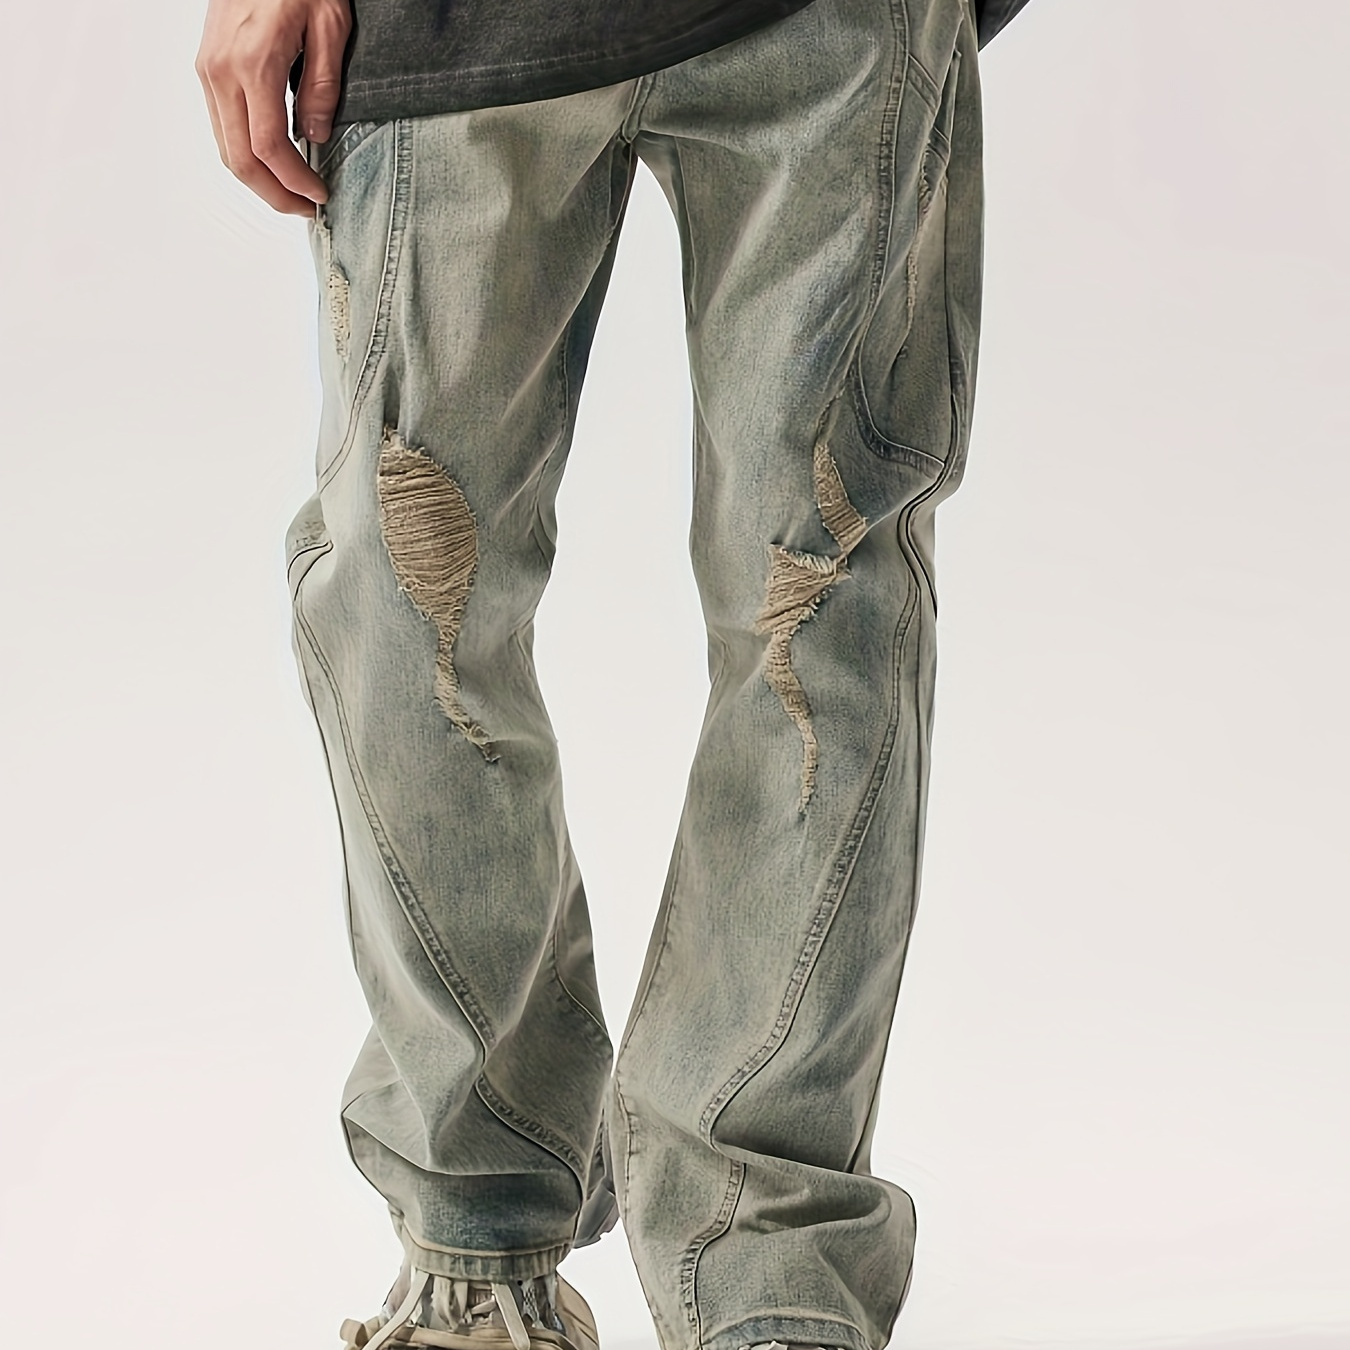 

Men's Loose Ripped Denim Trousers With Pockets, Street Style Cotton Blend Barrel Jeans For Outdoor Activities